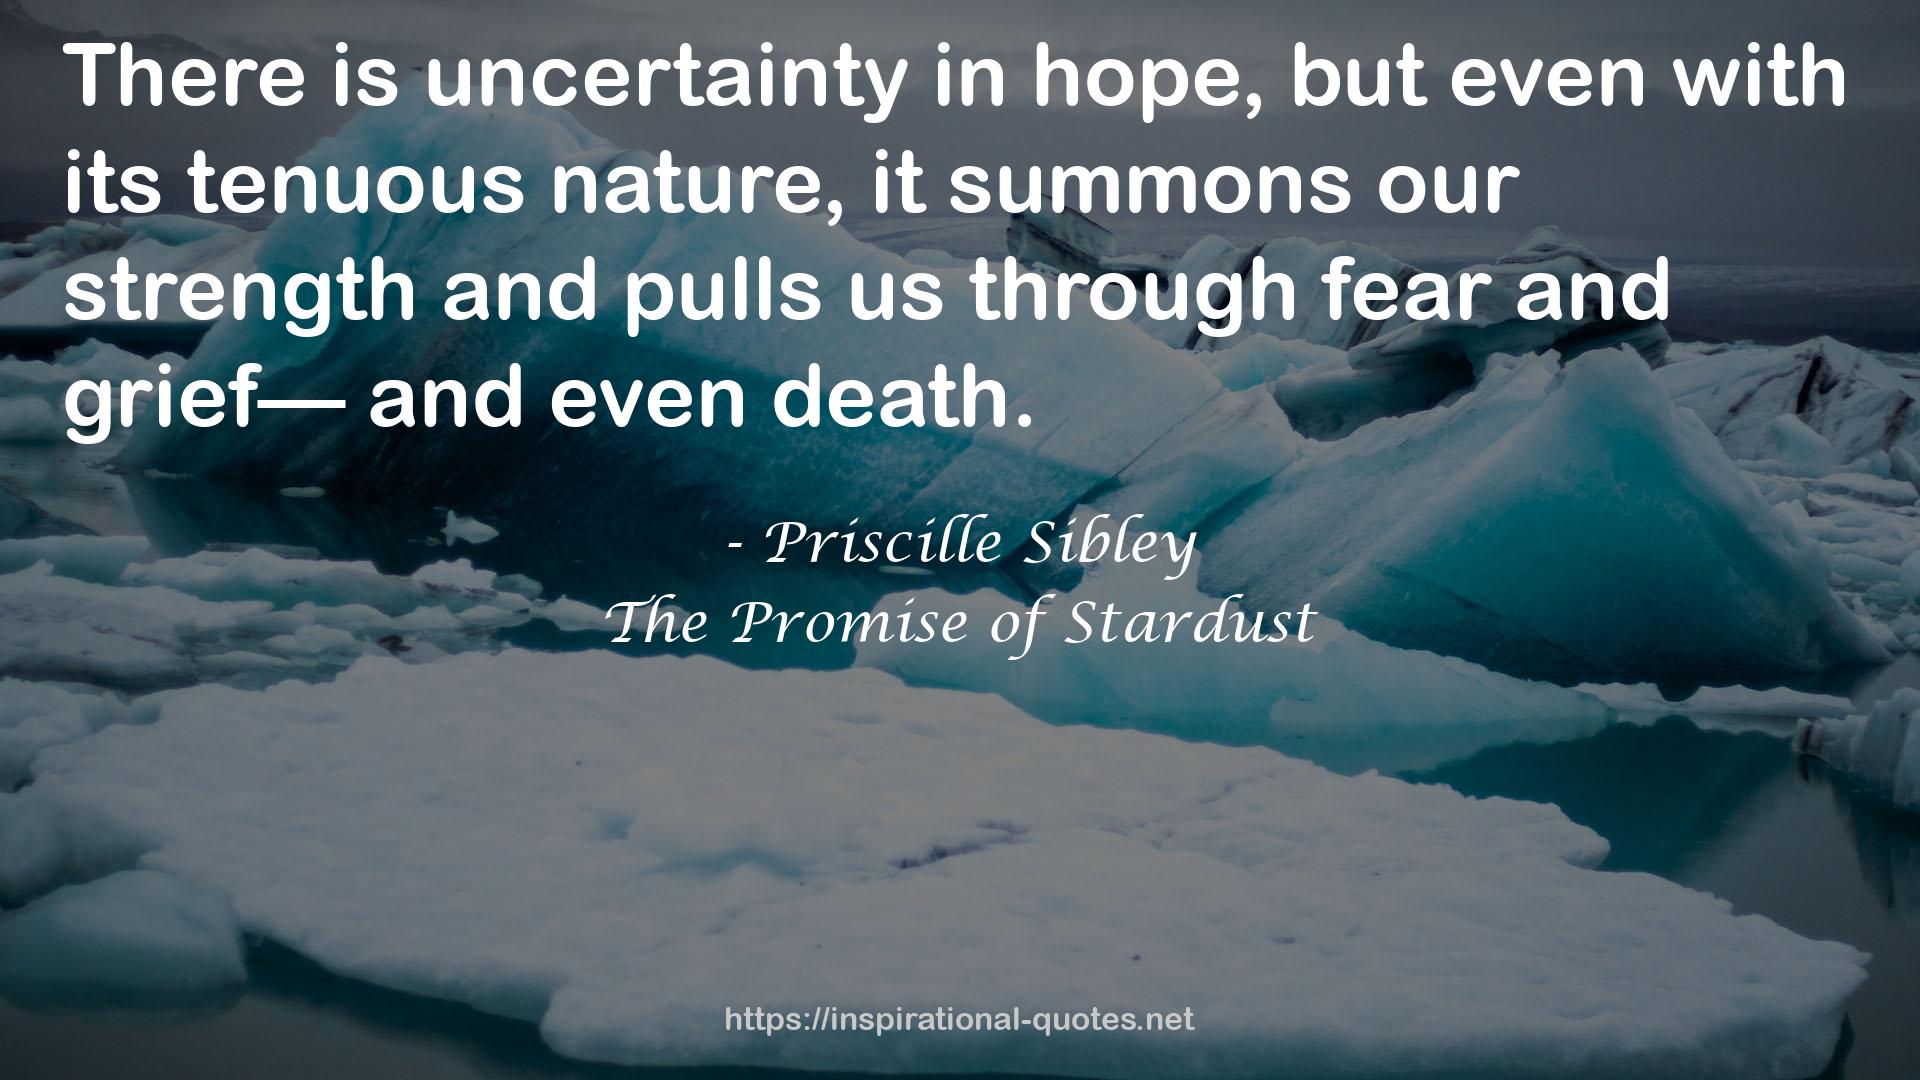 Priscille Sibley QUOTES